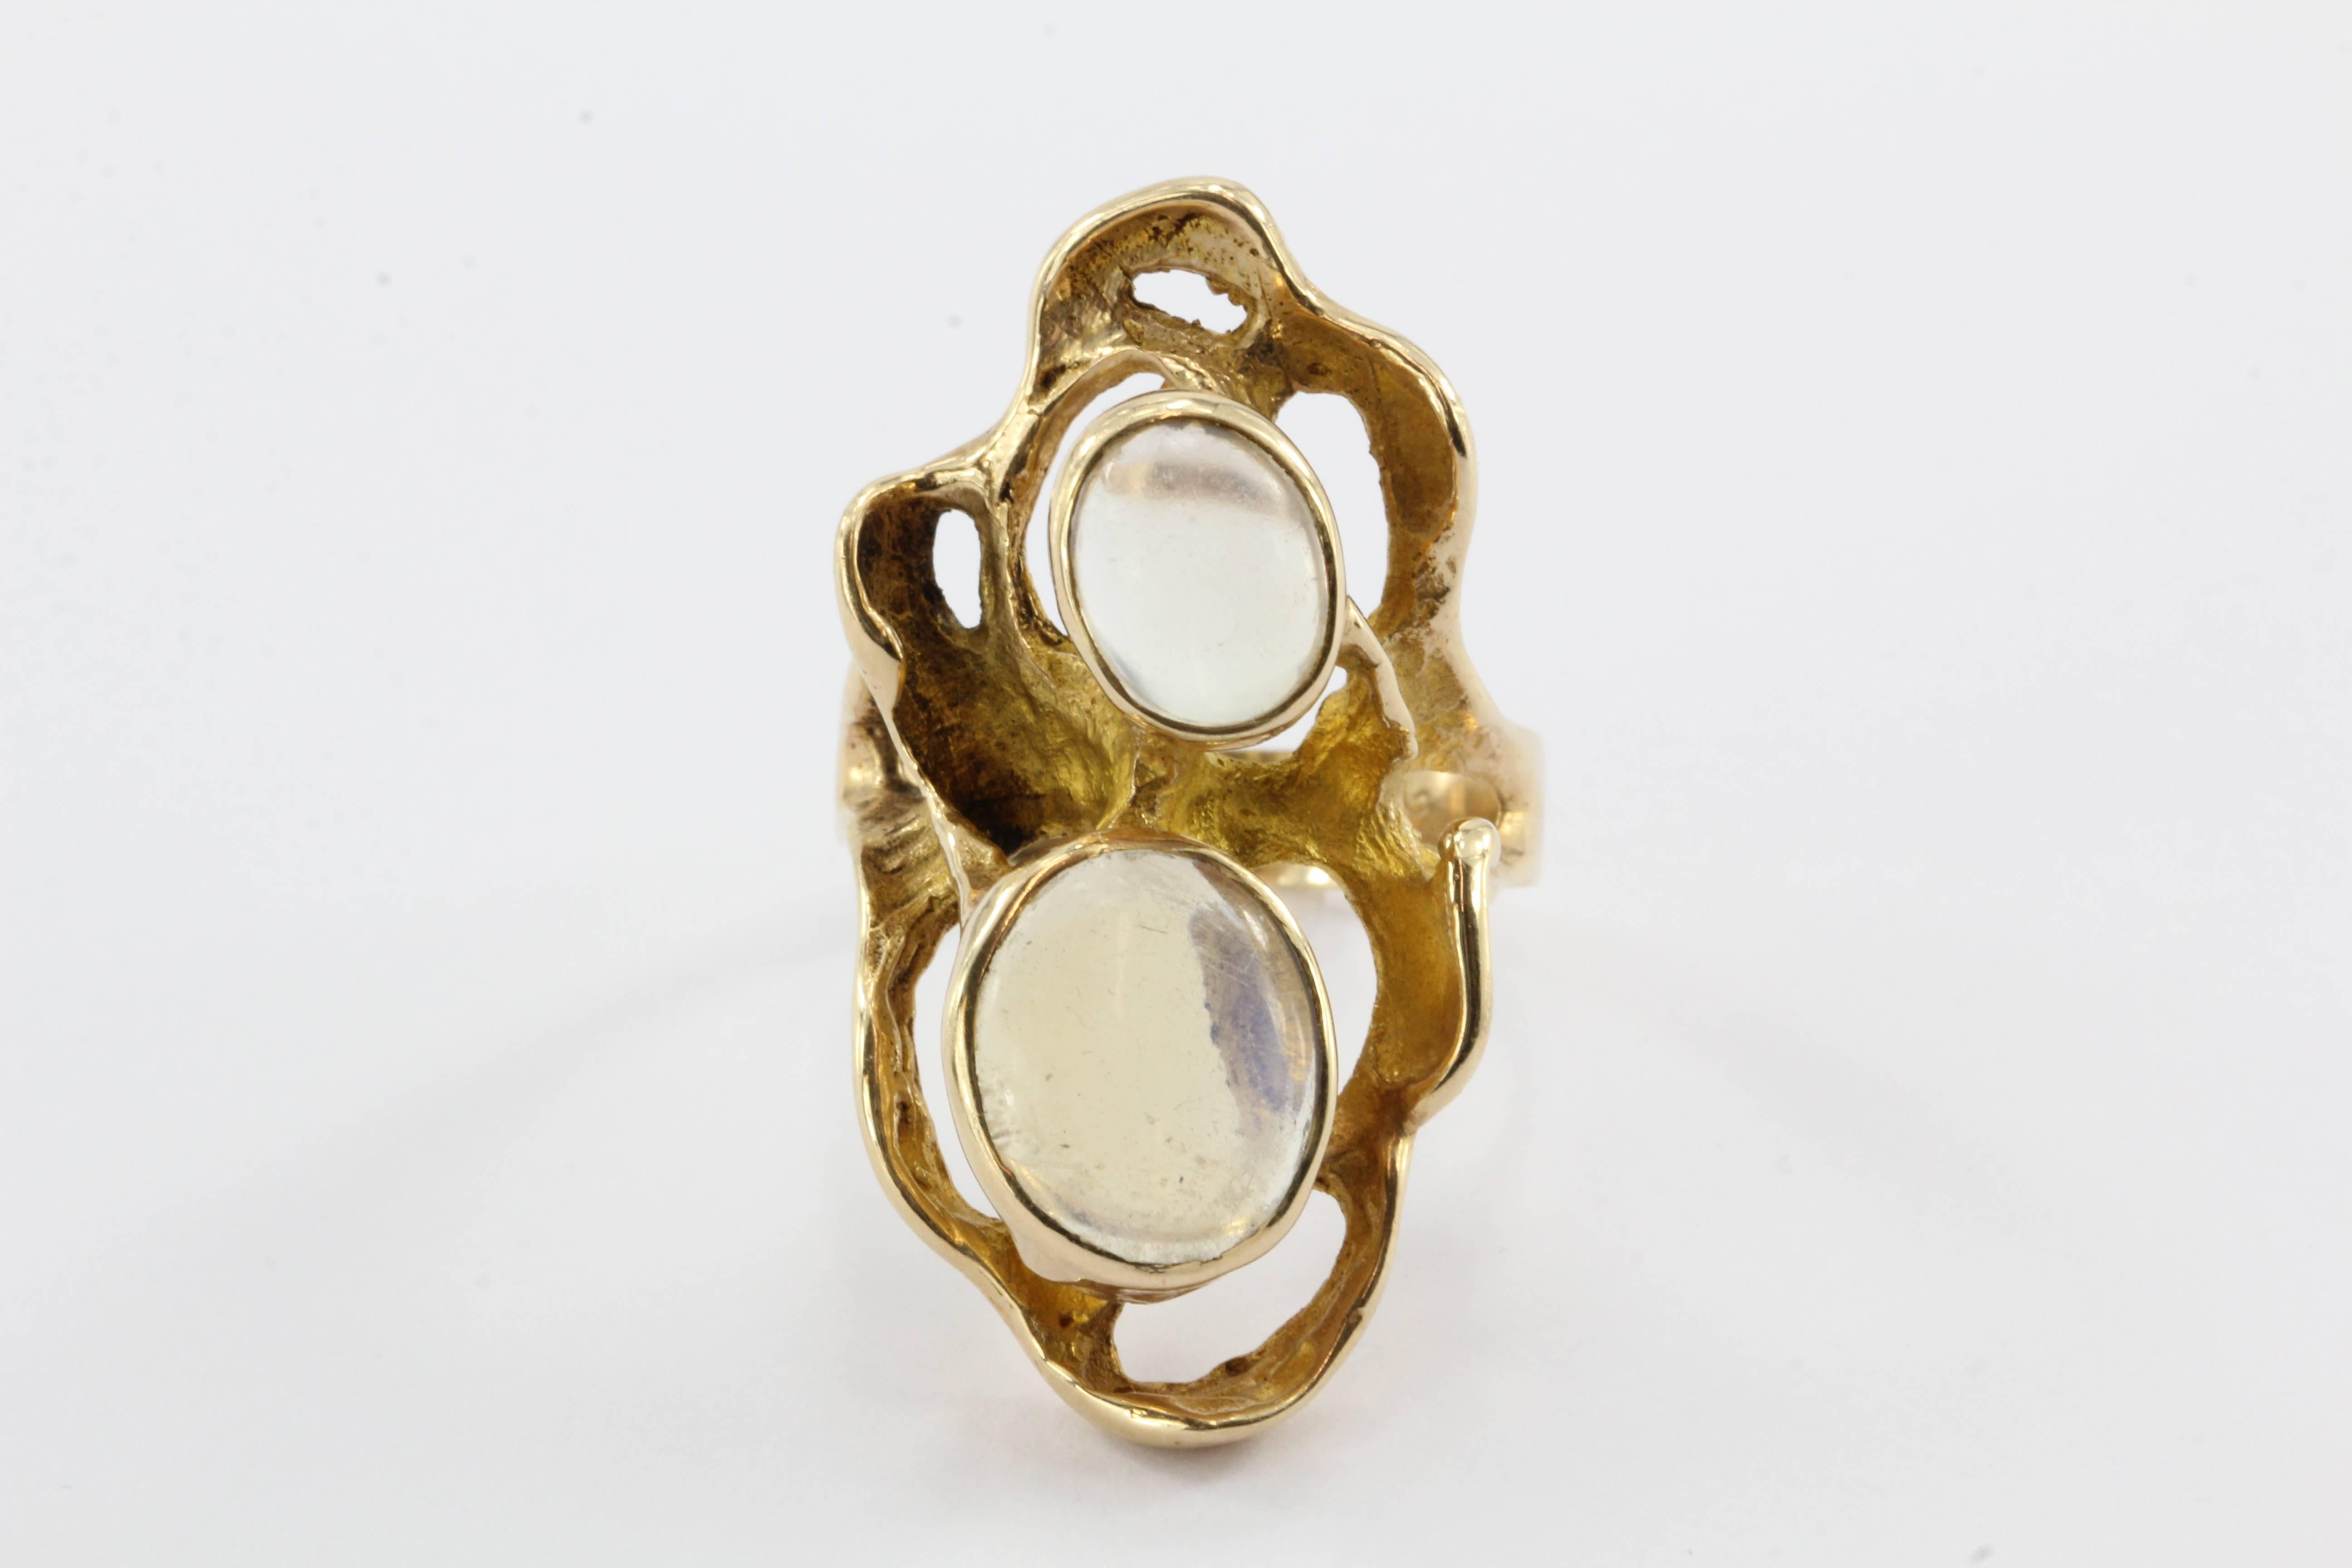 Modernist Abstract 14K Gold Chunky Double Moonstone Ring Signed G. The ring is in excellent estate condition and ready to wear. It is signed "14K G", the G is the designer's markers mark. The larger moonstone is about 4 carats and the